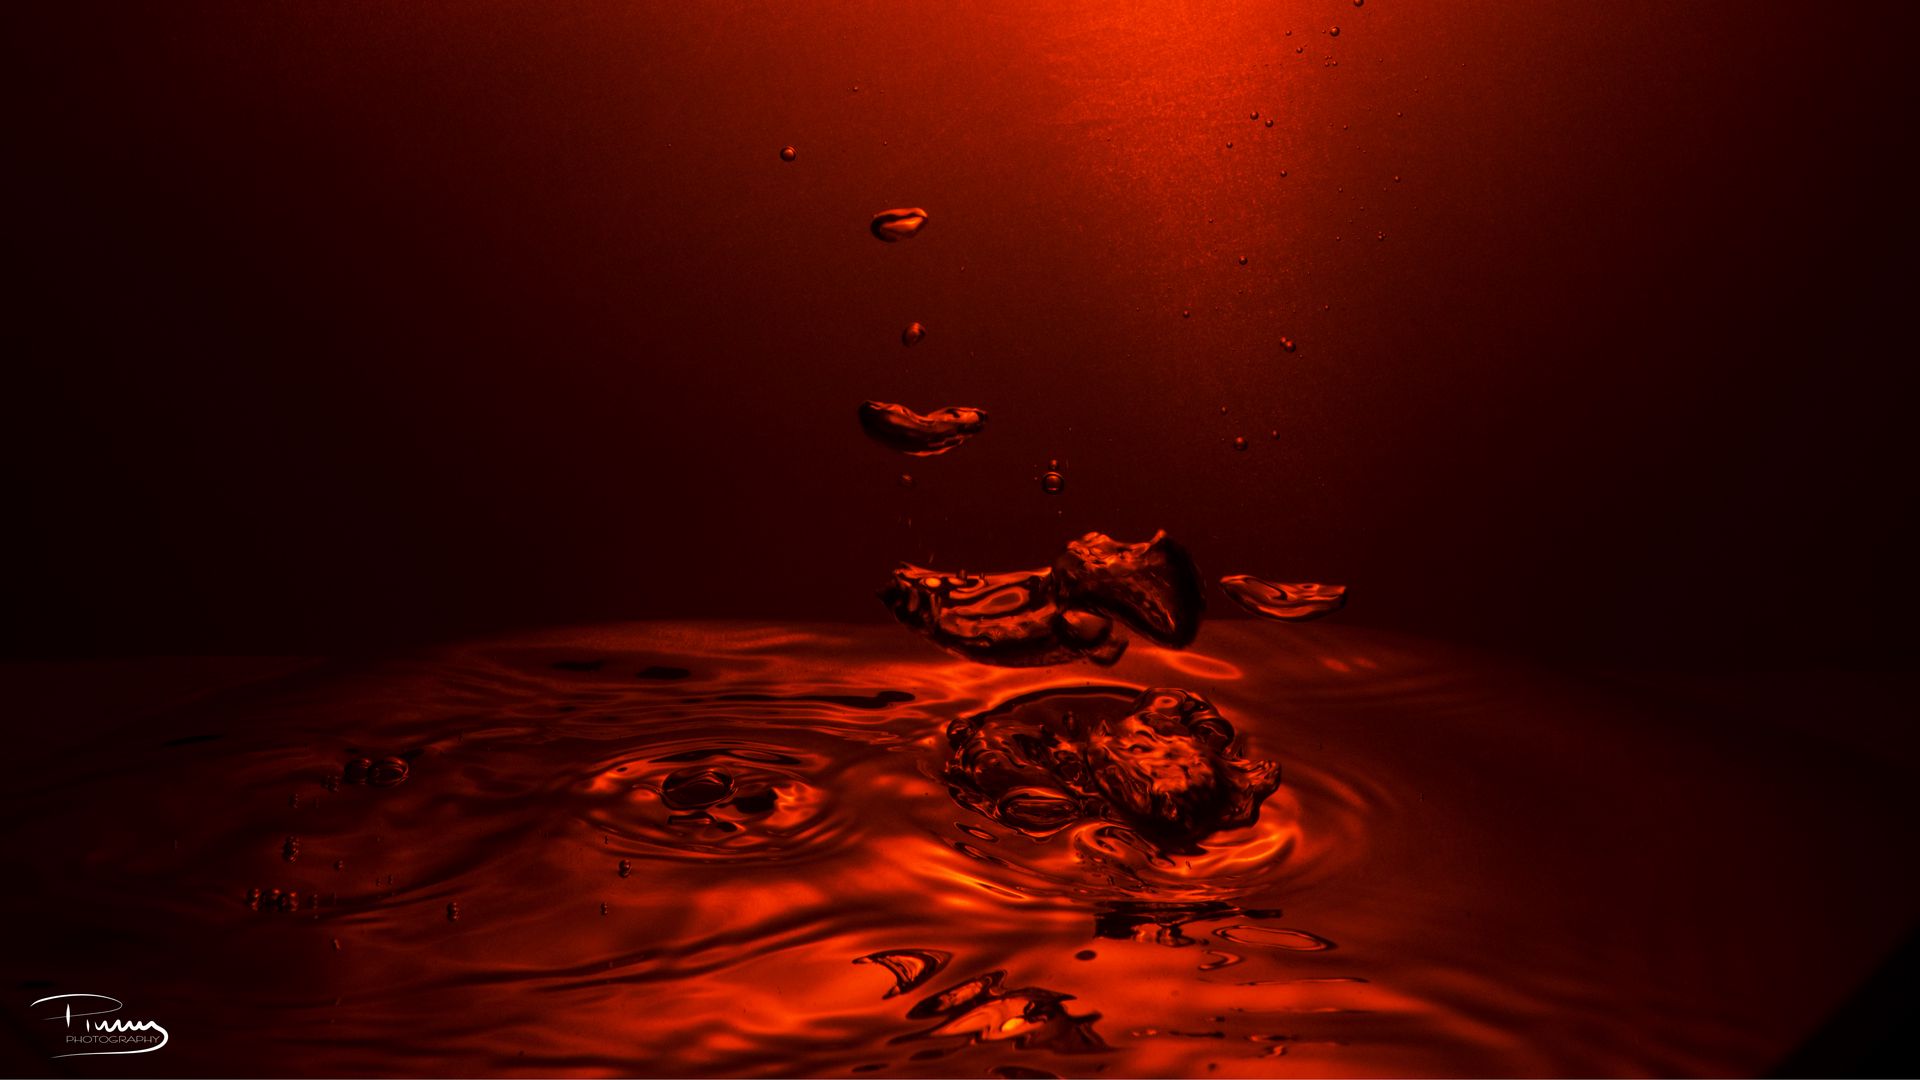 Download Wallpaper 1920x1080 Water Drops Ripples Red Full Hd Hdtv Fhd 1080p Hd Background